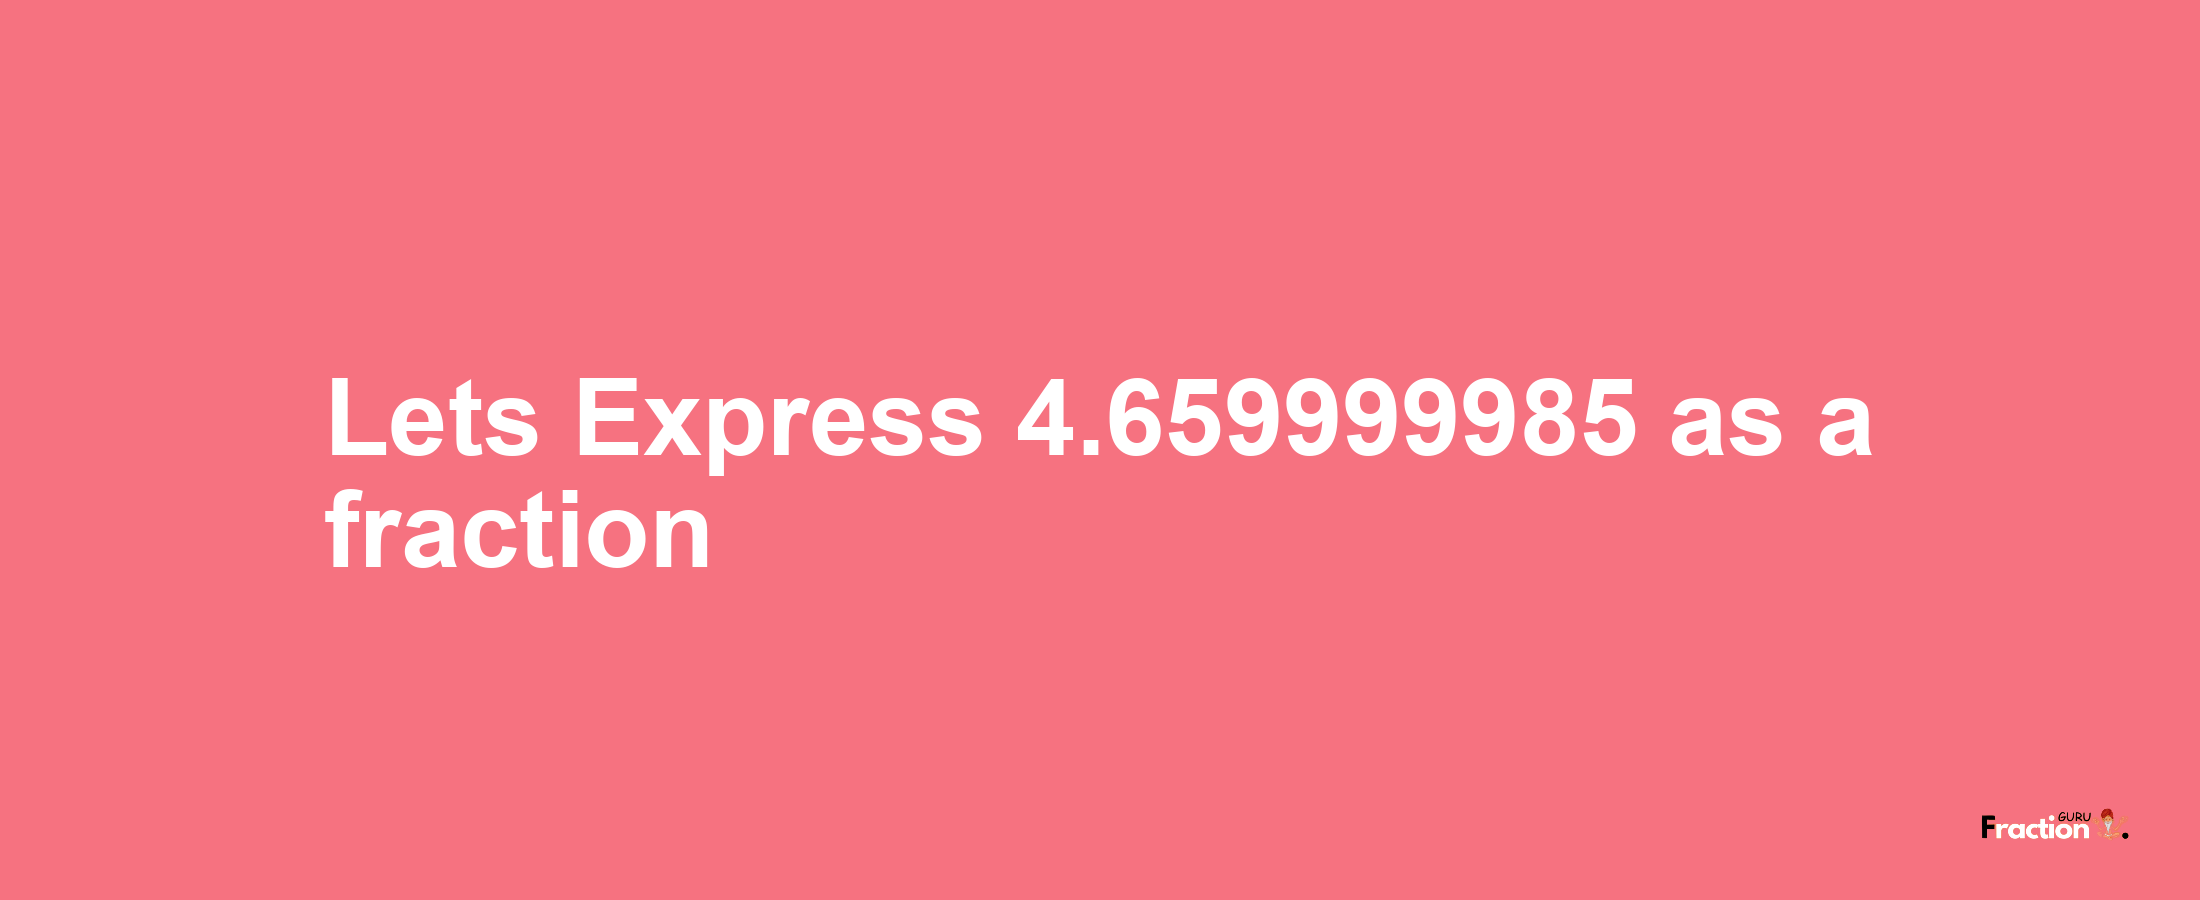 Lets Express 4.659999985 as afraction